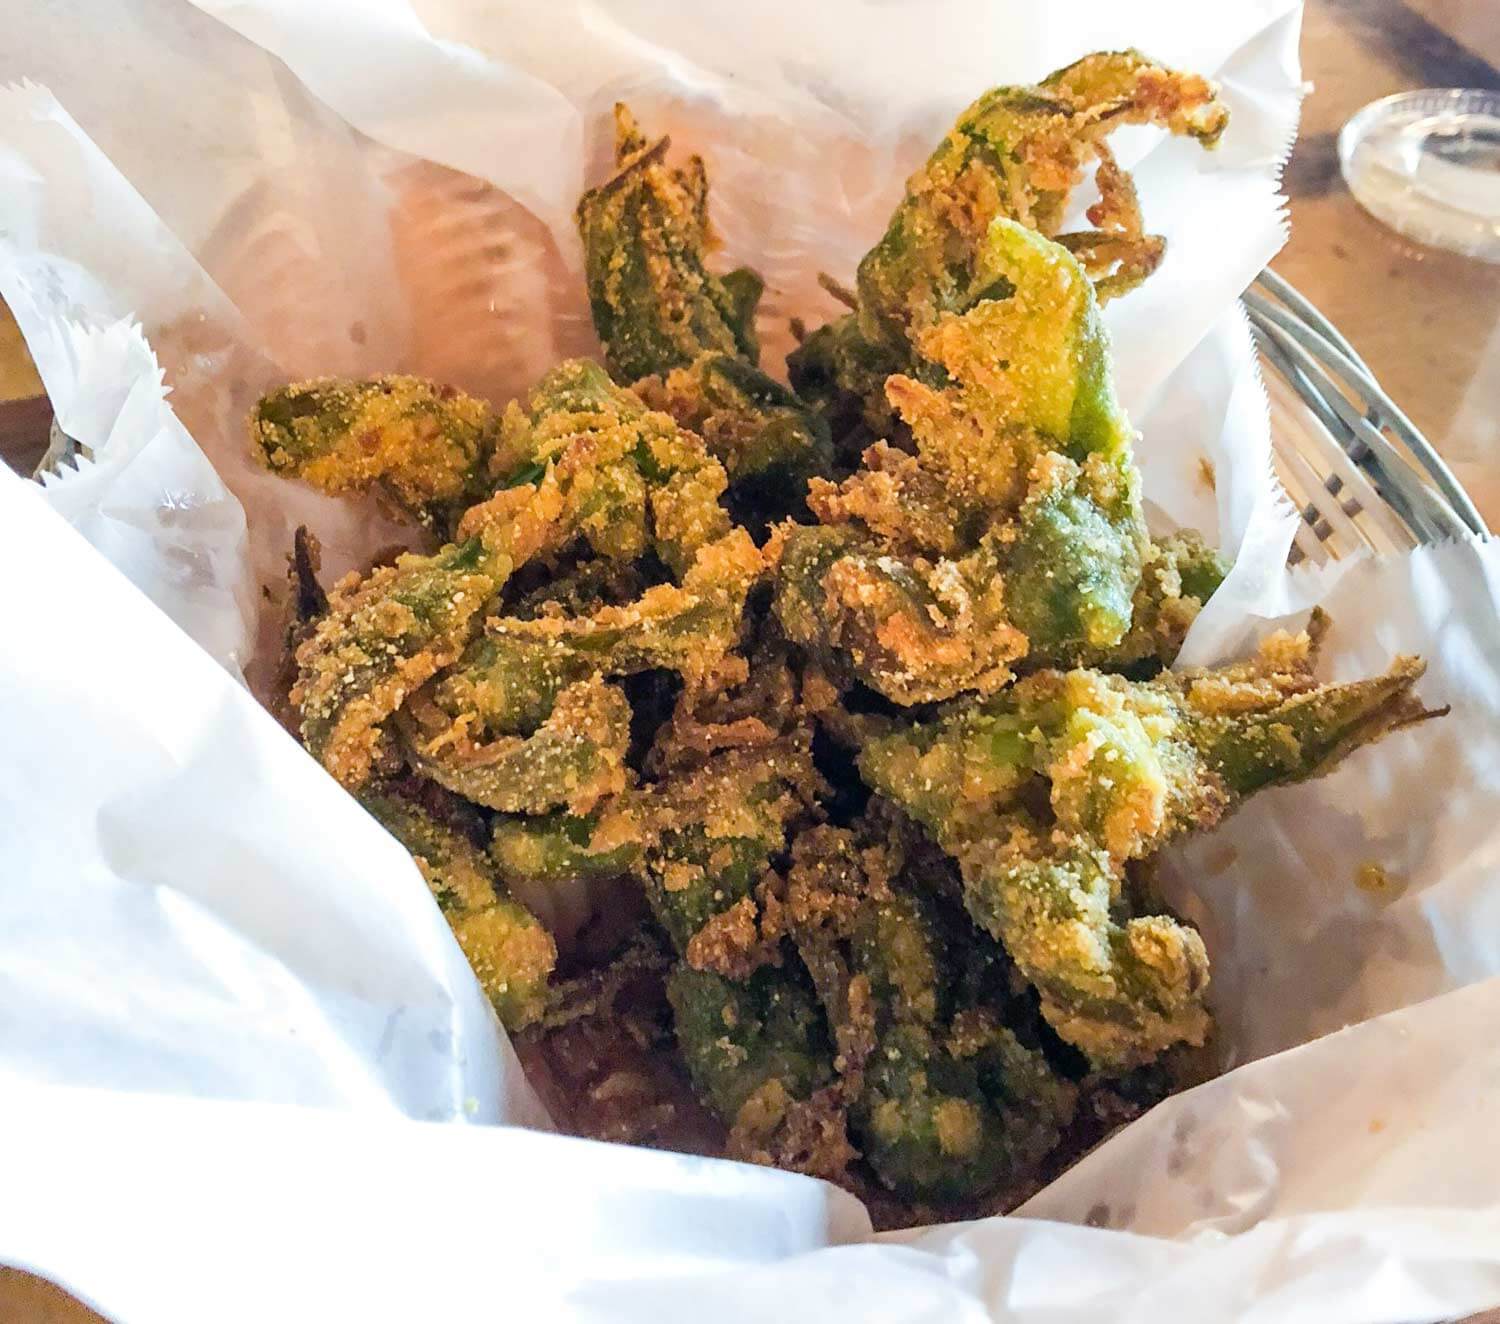 Fried okra at Driftwood Bistro